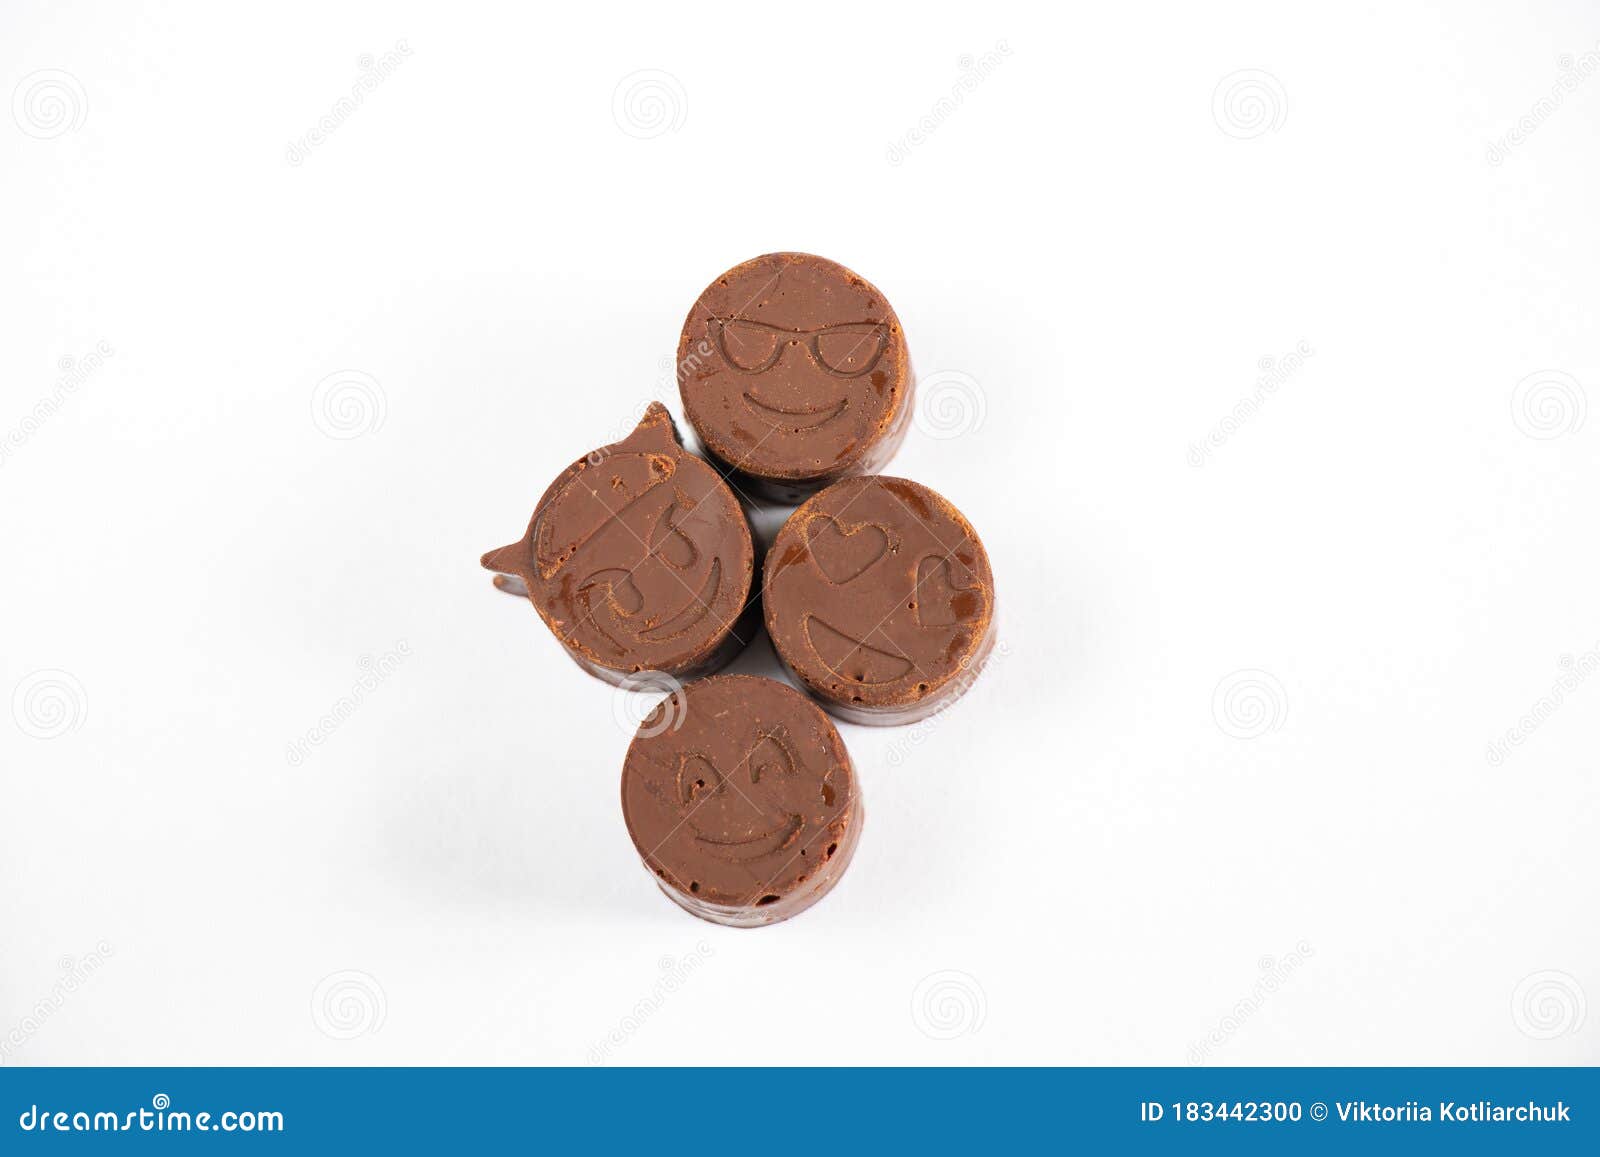 Homemade Chocolate Smiles in the Form of Smiles on an Isolated ...